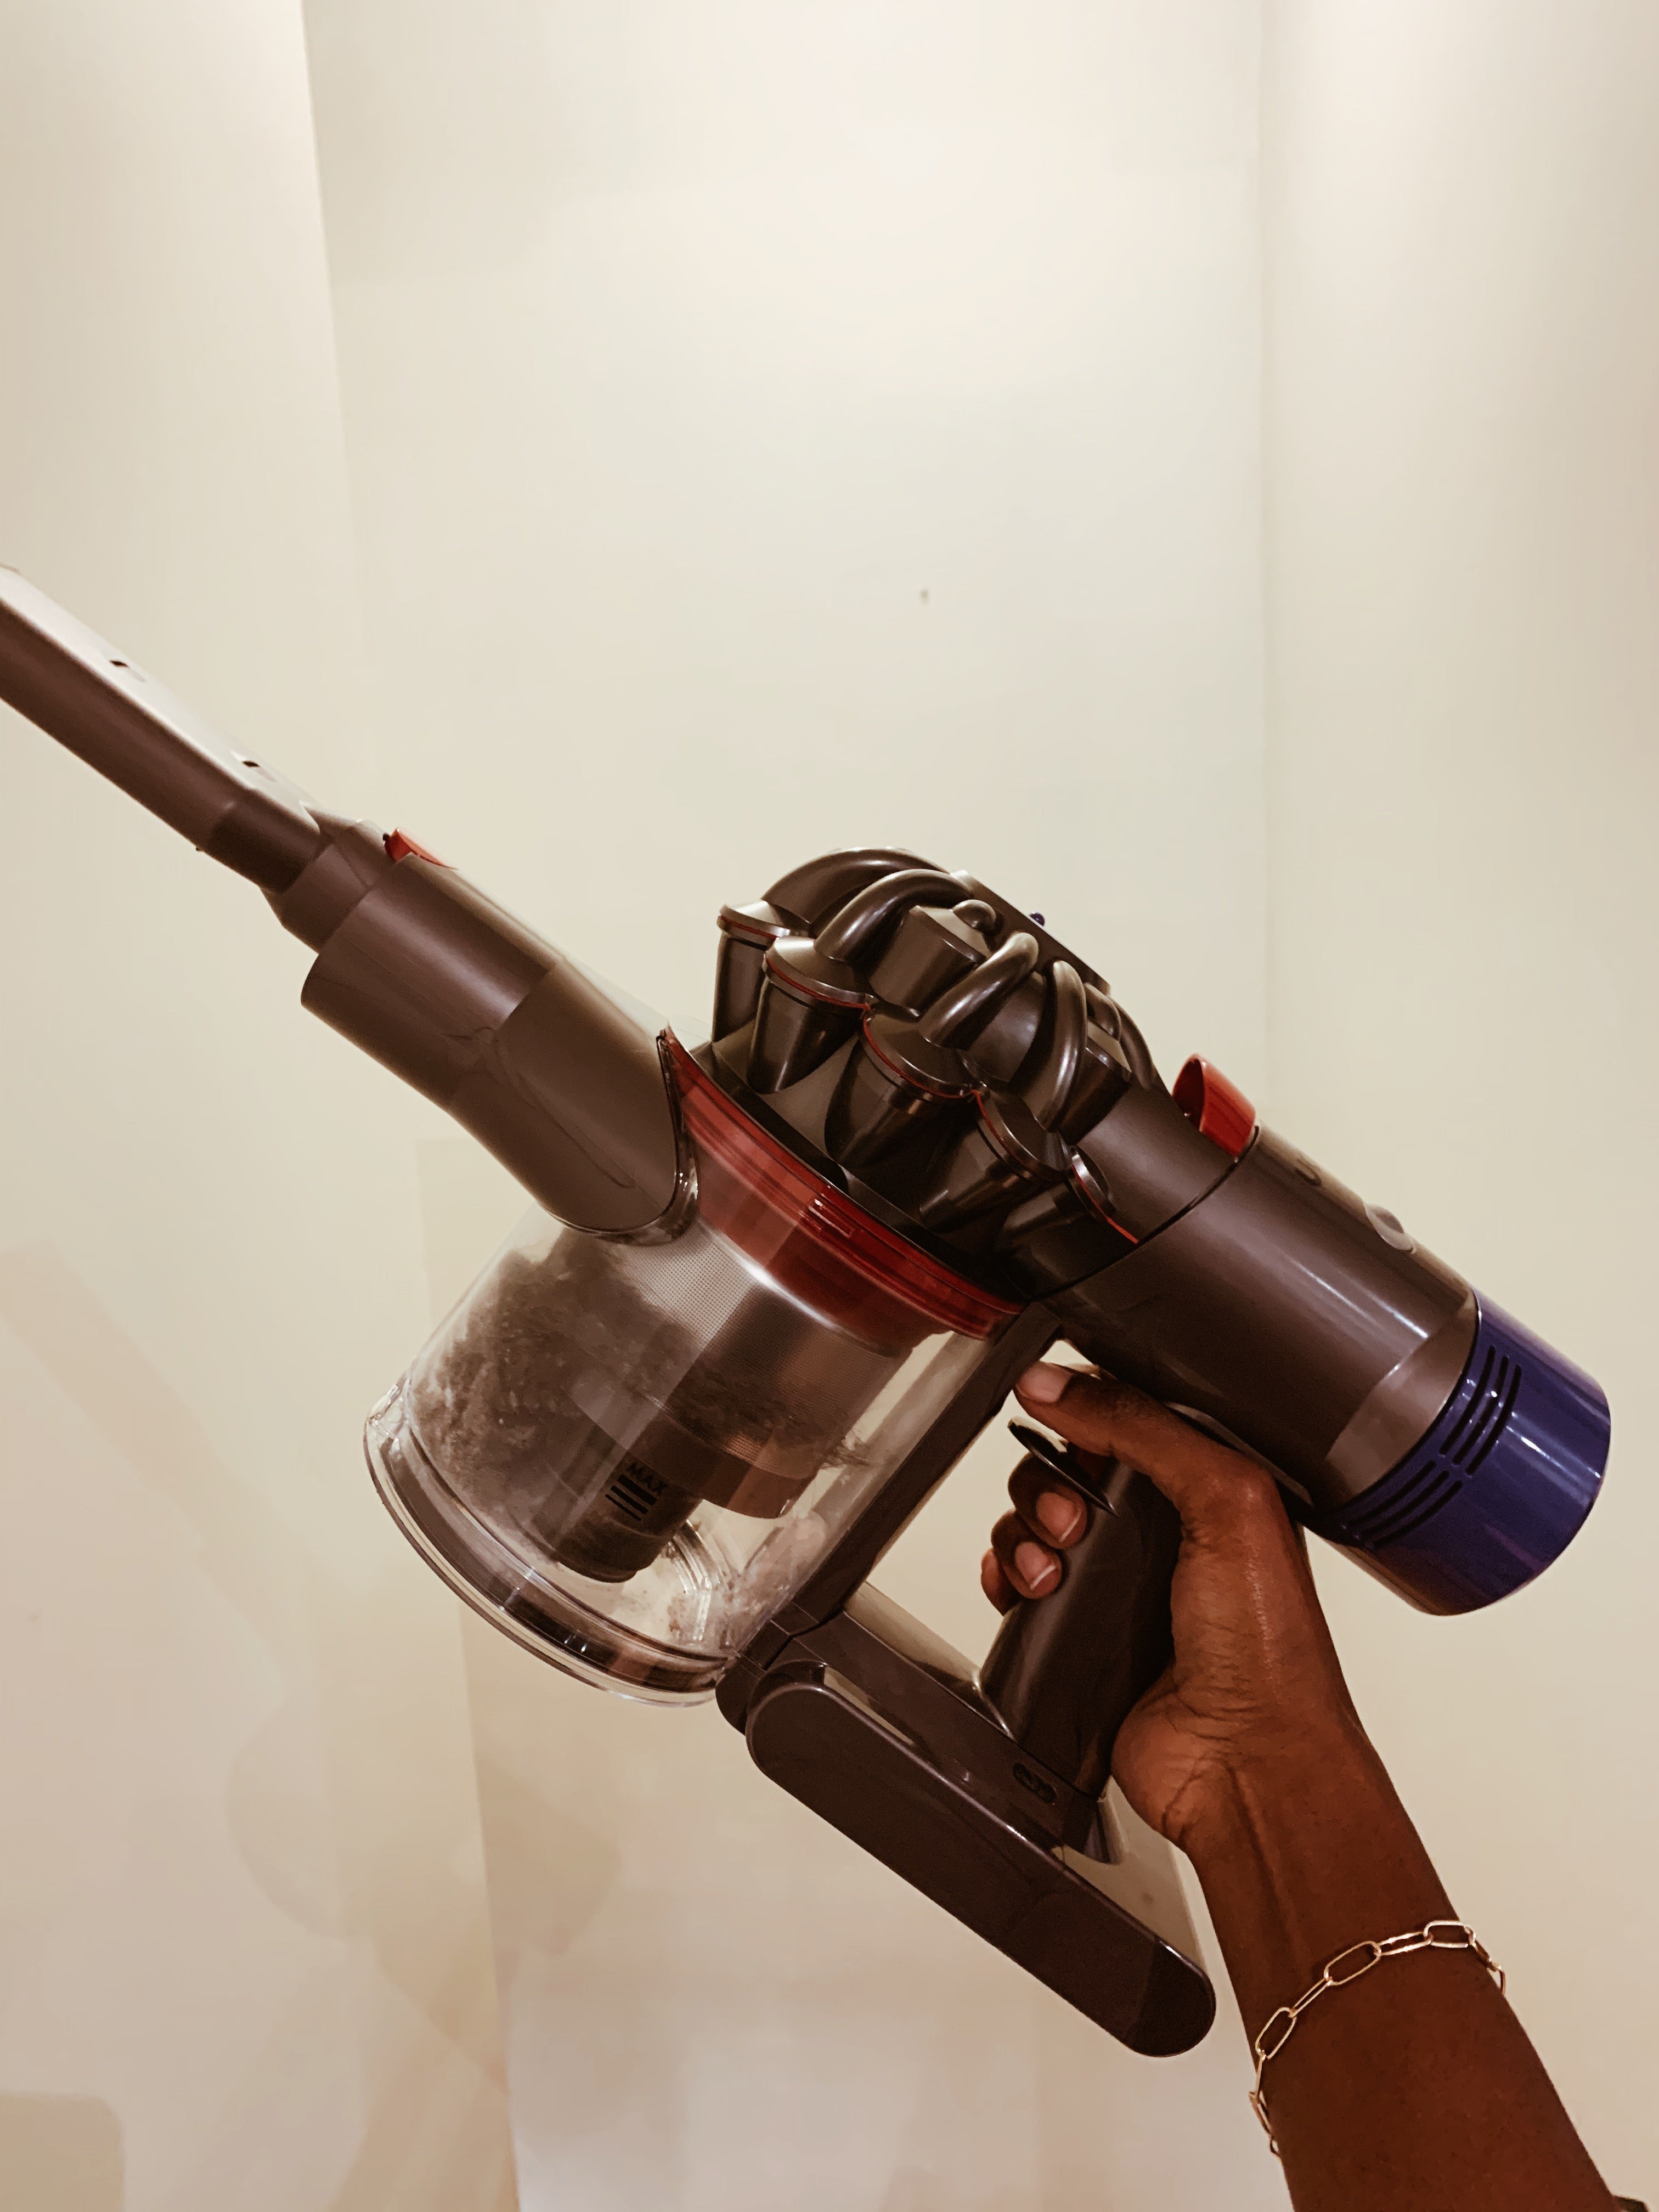 Best Dyson Vacuum 2020, V8 Absolute Review